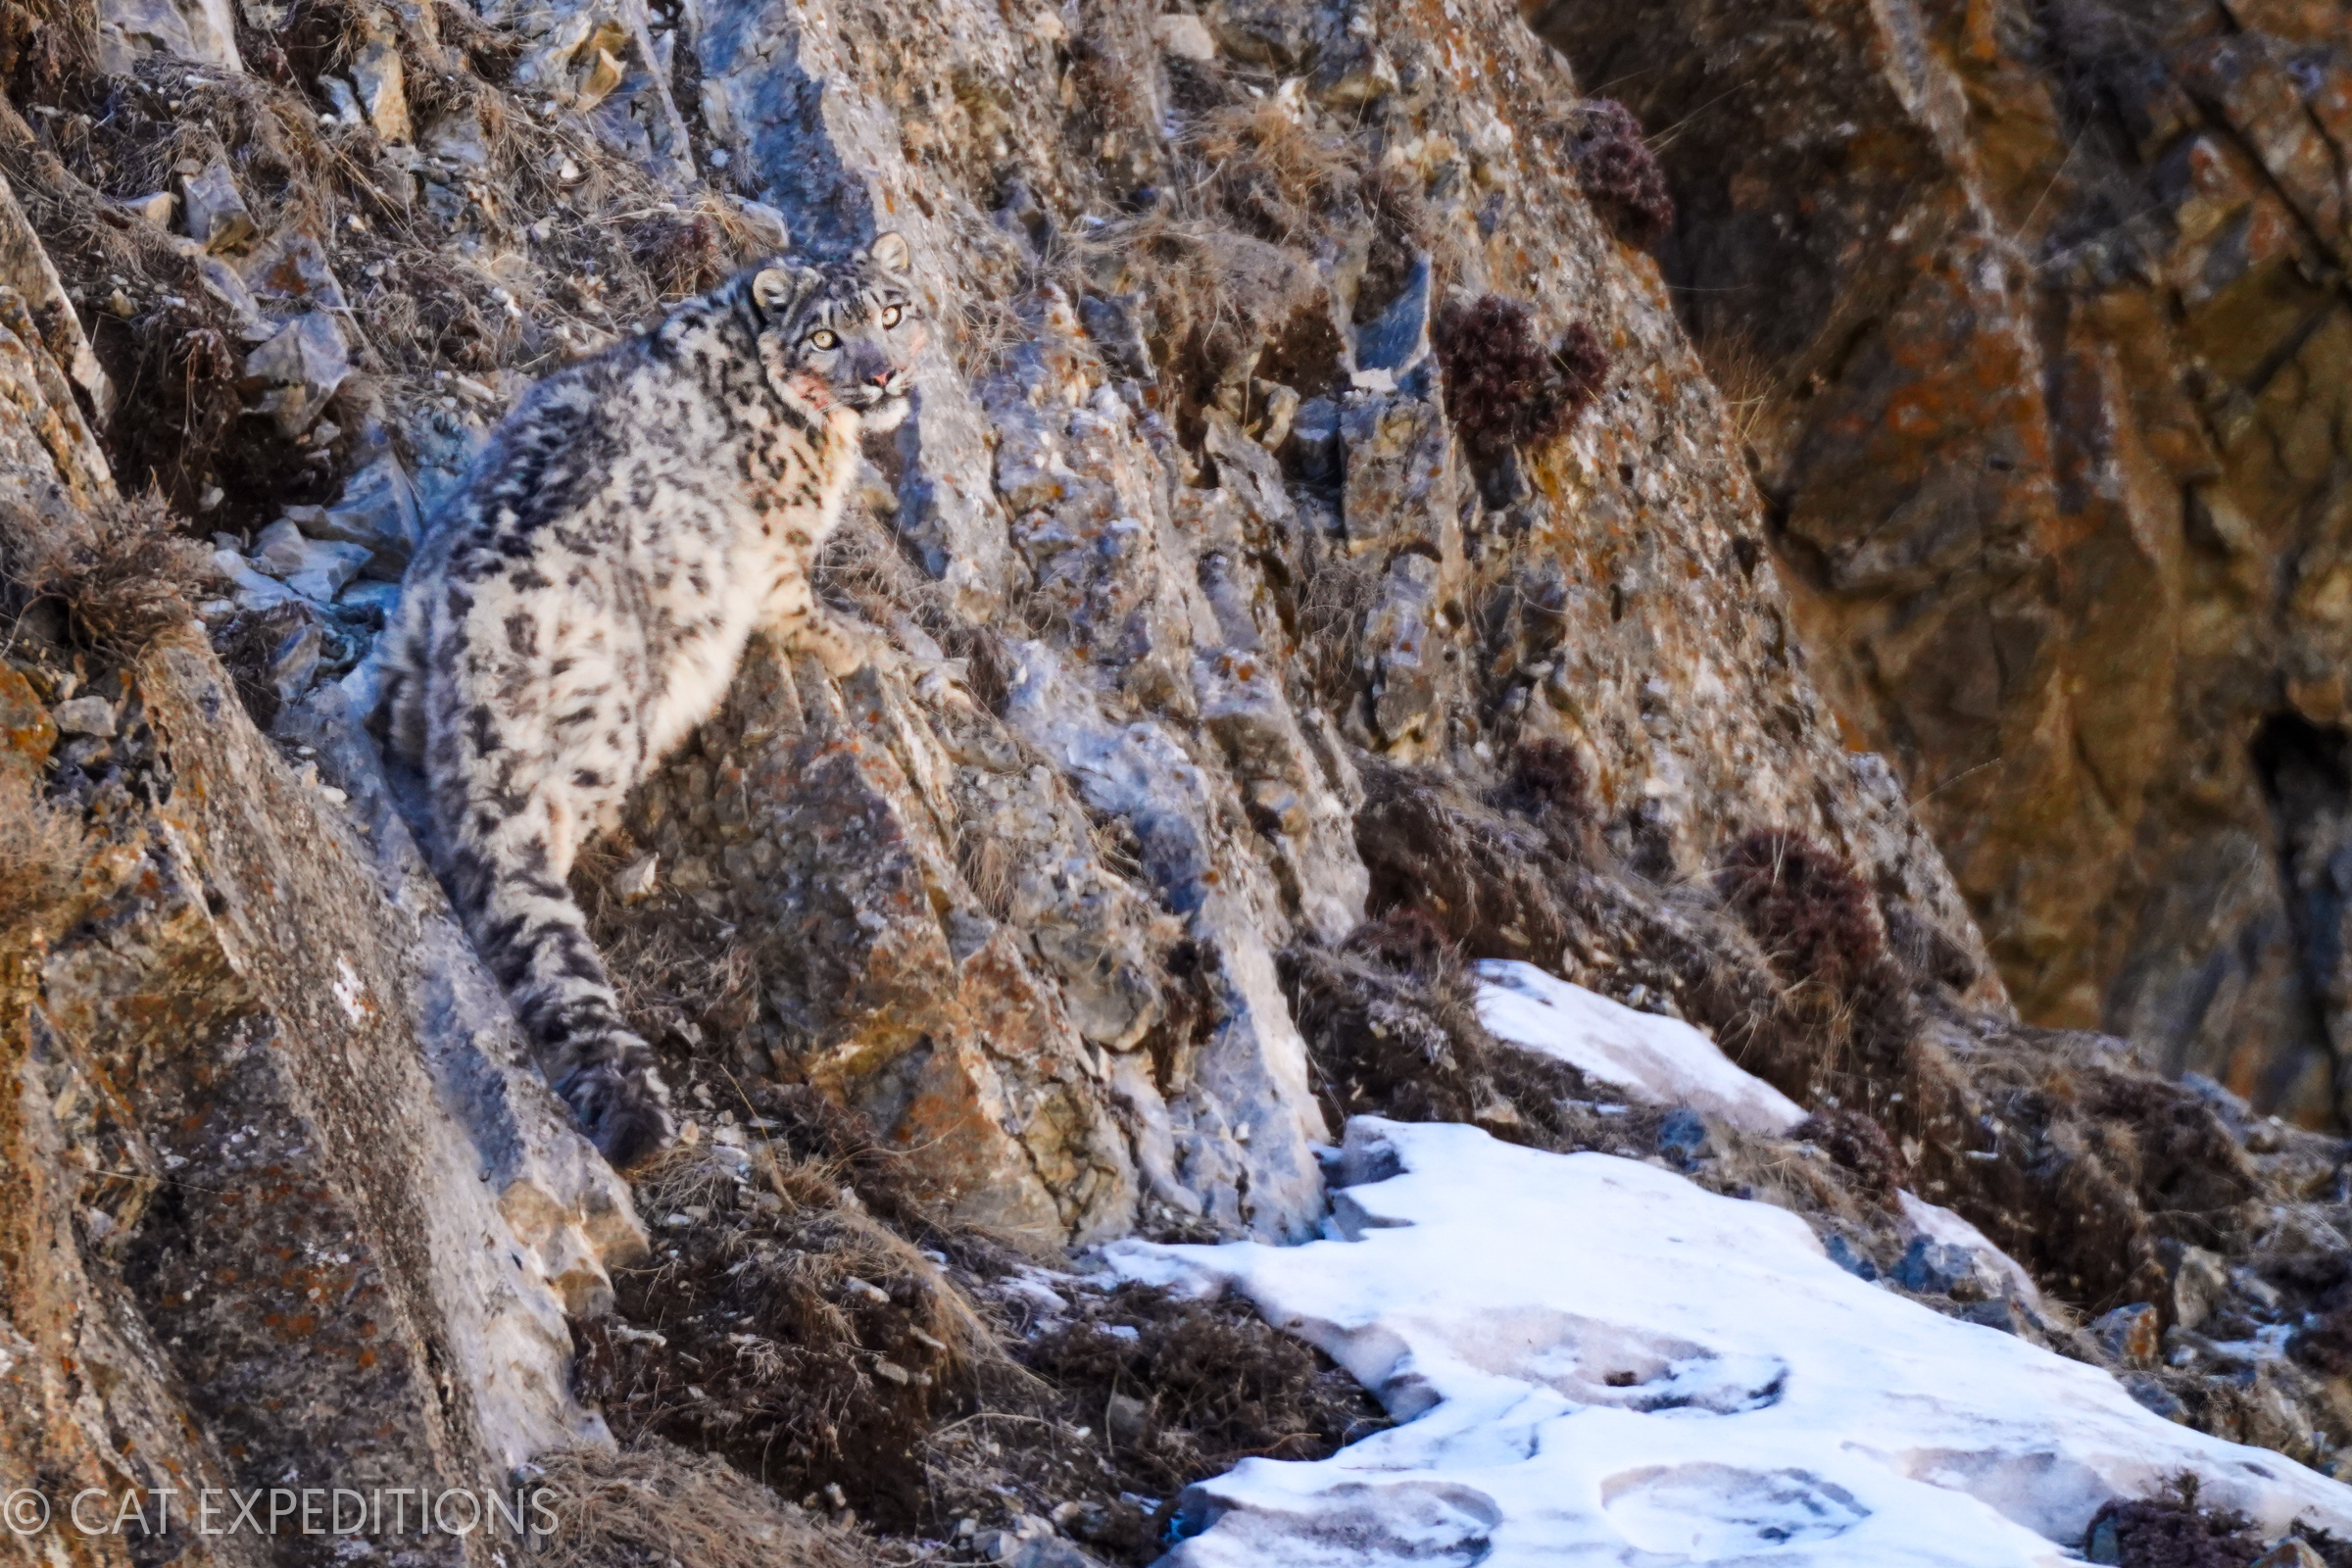 Snow leopards are independent of their mother around twenty months old, however they often still link up with their mothers, like this sub-adult male did, when she had caught a carcass.